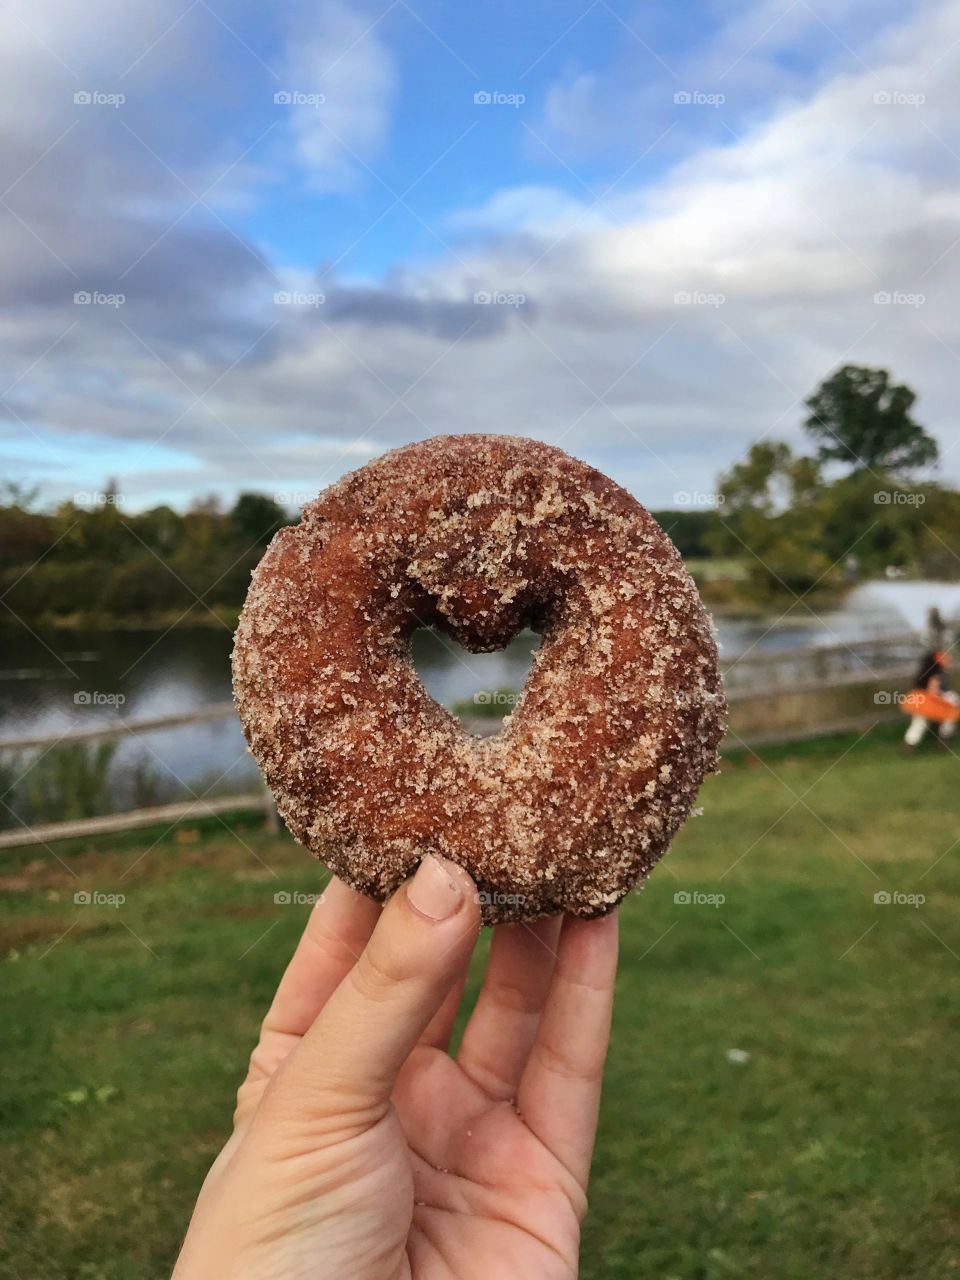 Who doesn't love a fresh apple cider donut in the fall??